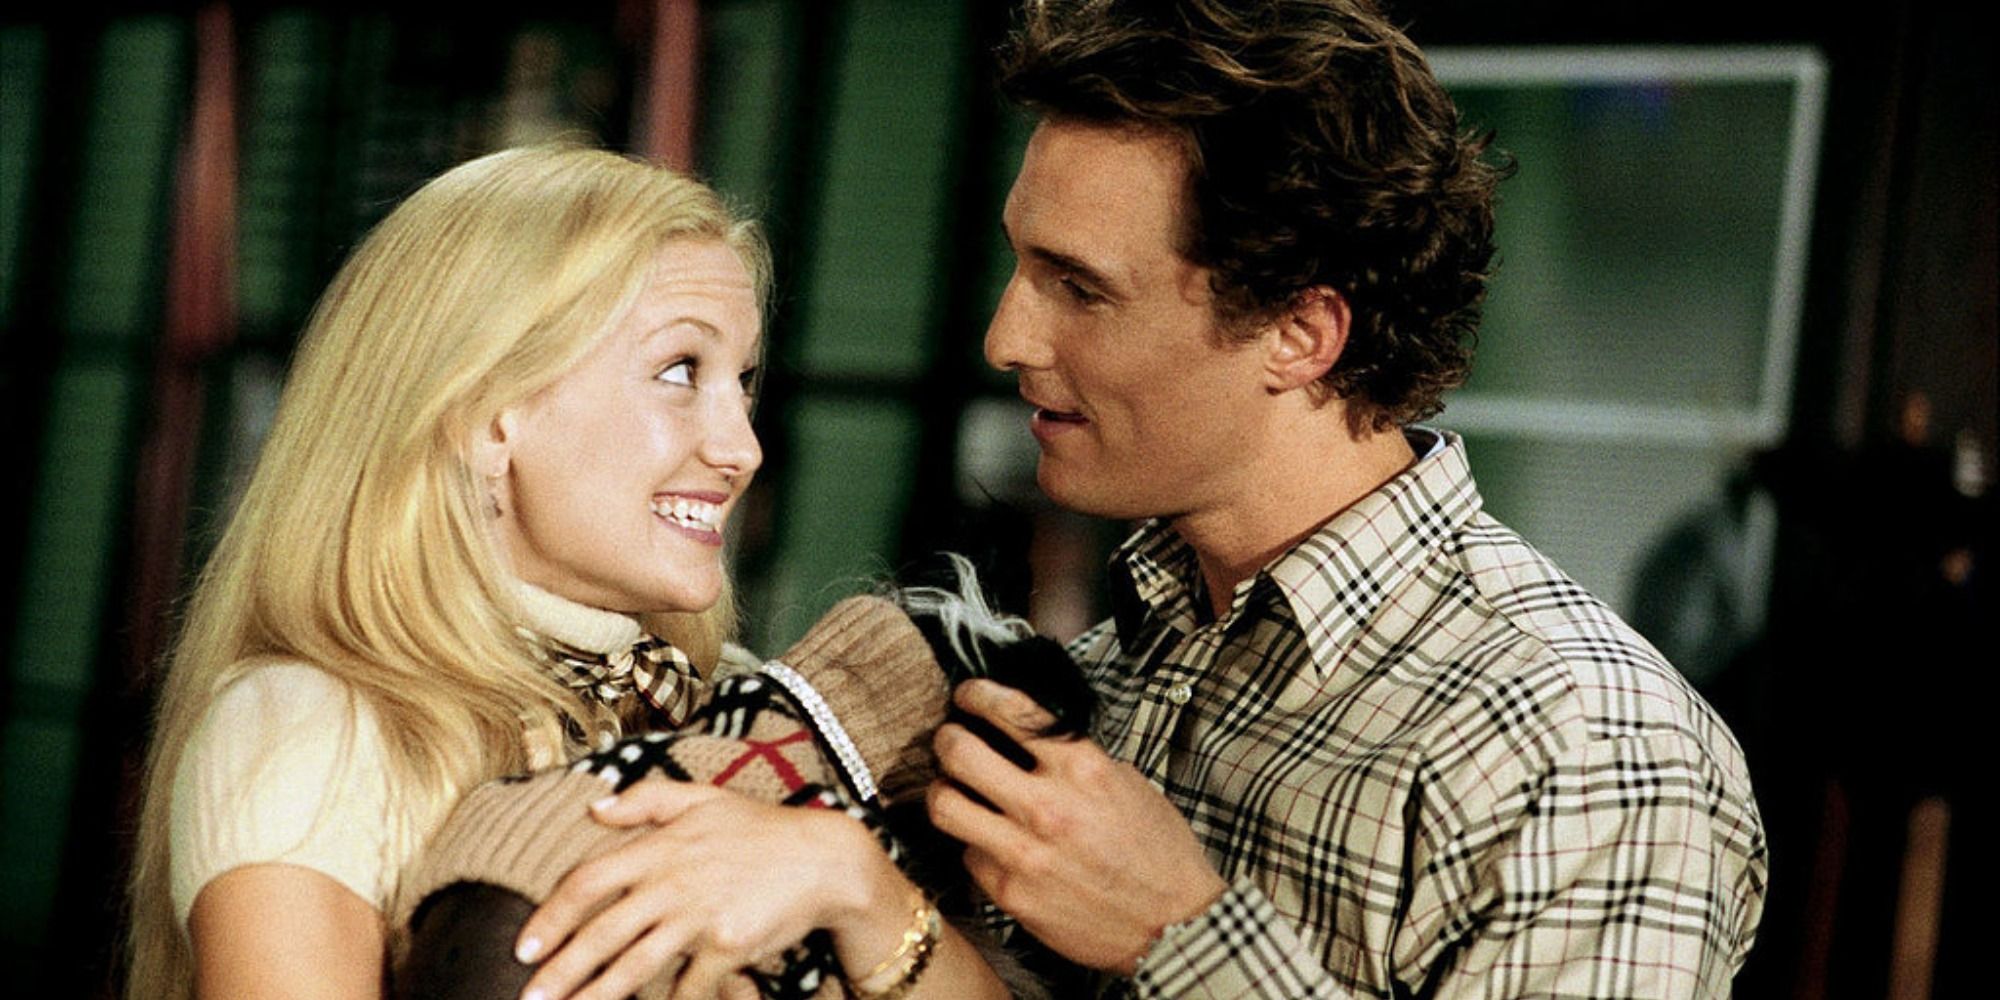 Kate Hudson holding a dog and talking to Matthew Mcconaughey